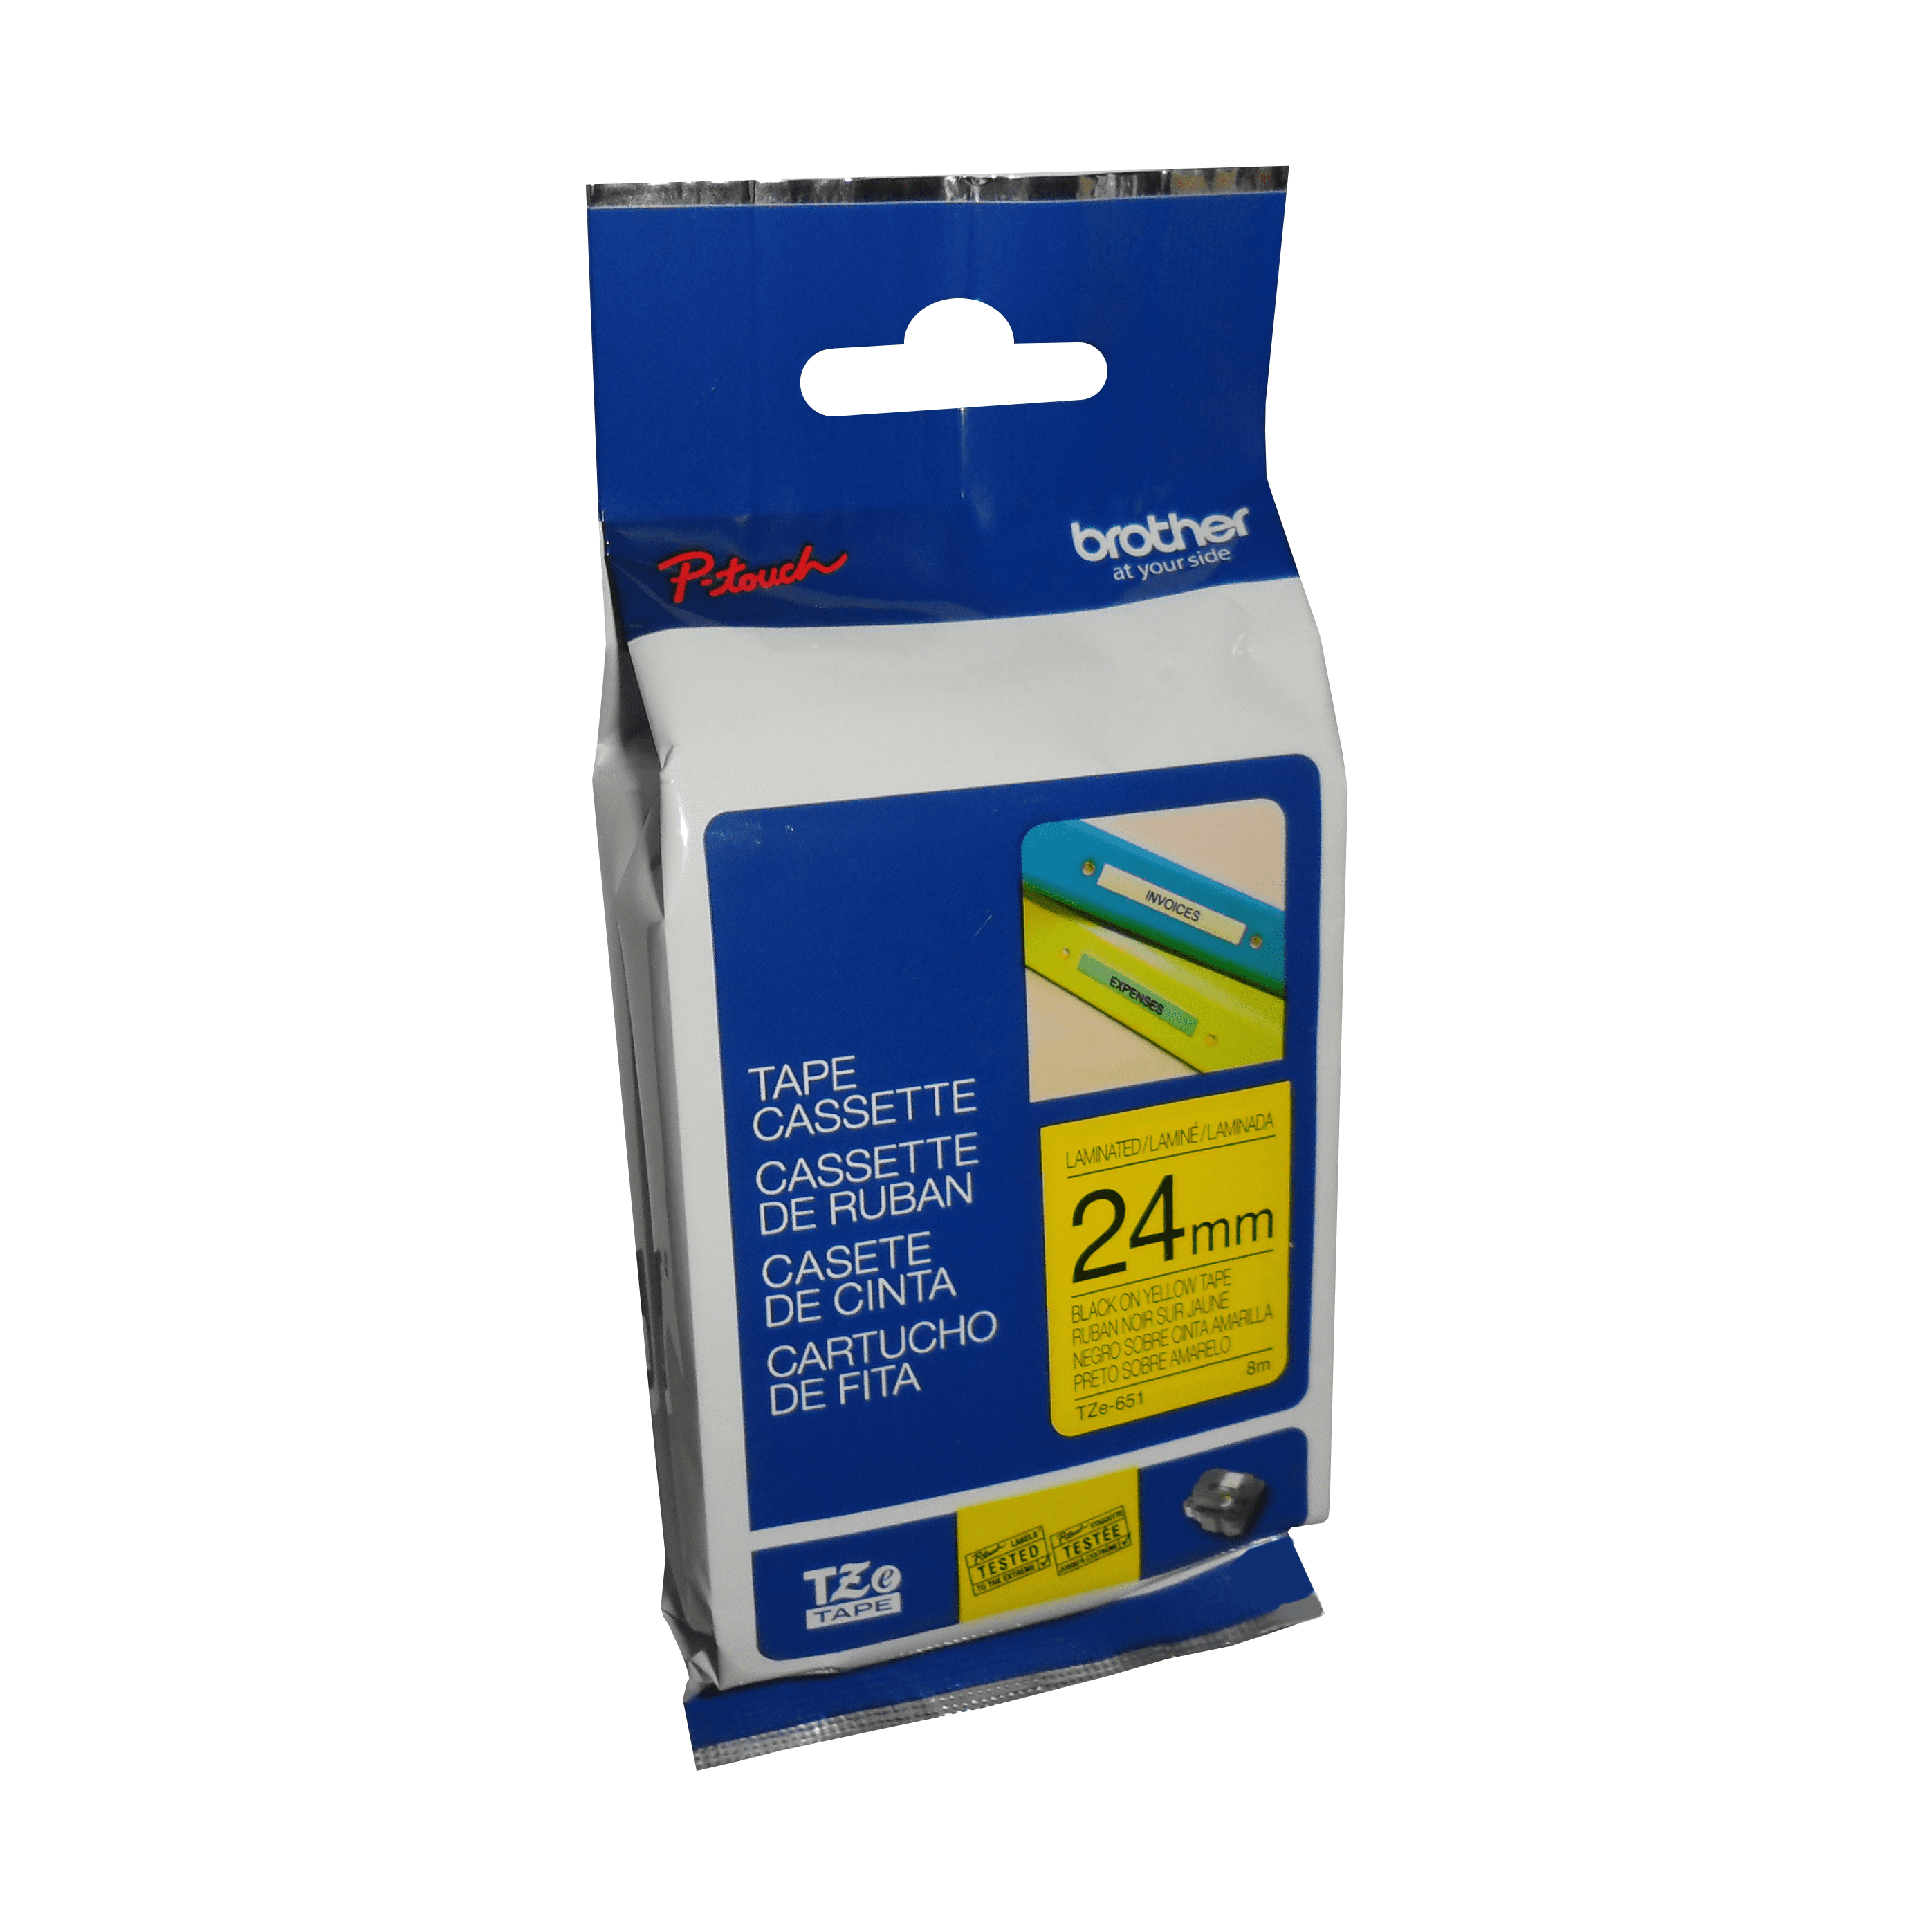 Brother Genuine TZe651 Black on Yellow Laminated Tape for P-touch Label Makers, 24 mm wide x 8 m long